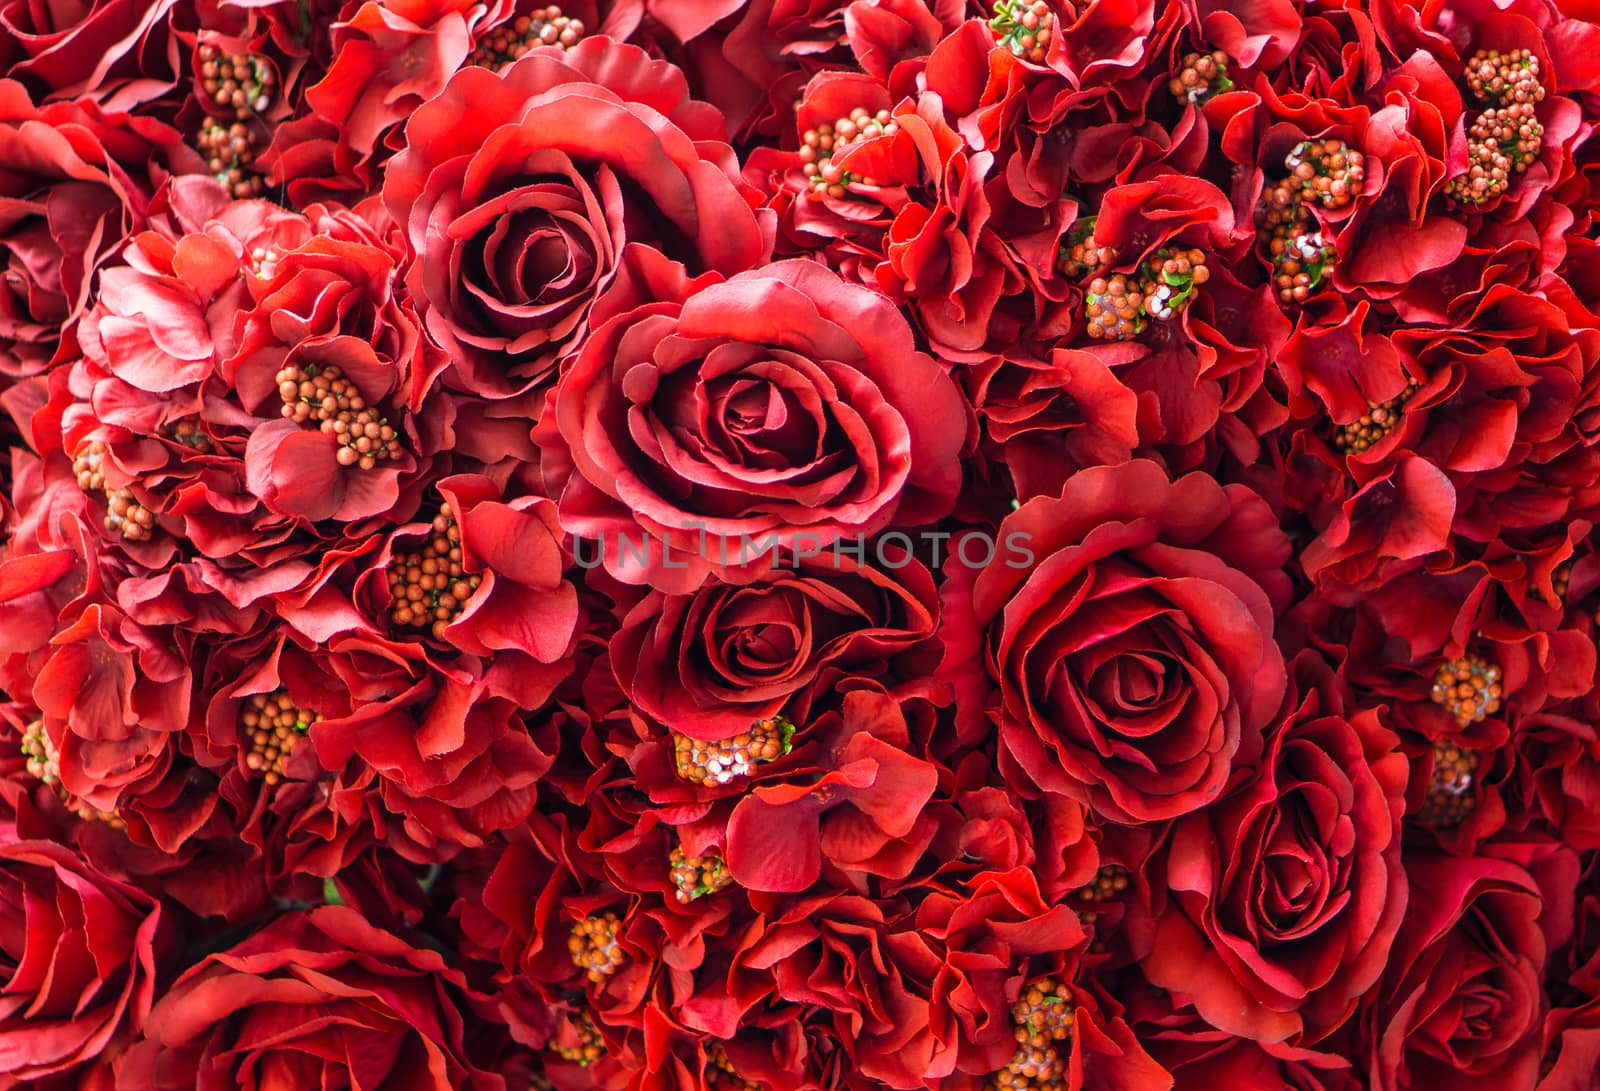 Many of Red roses flowers background by pkproject